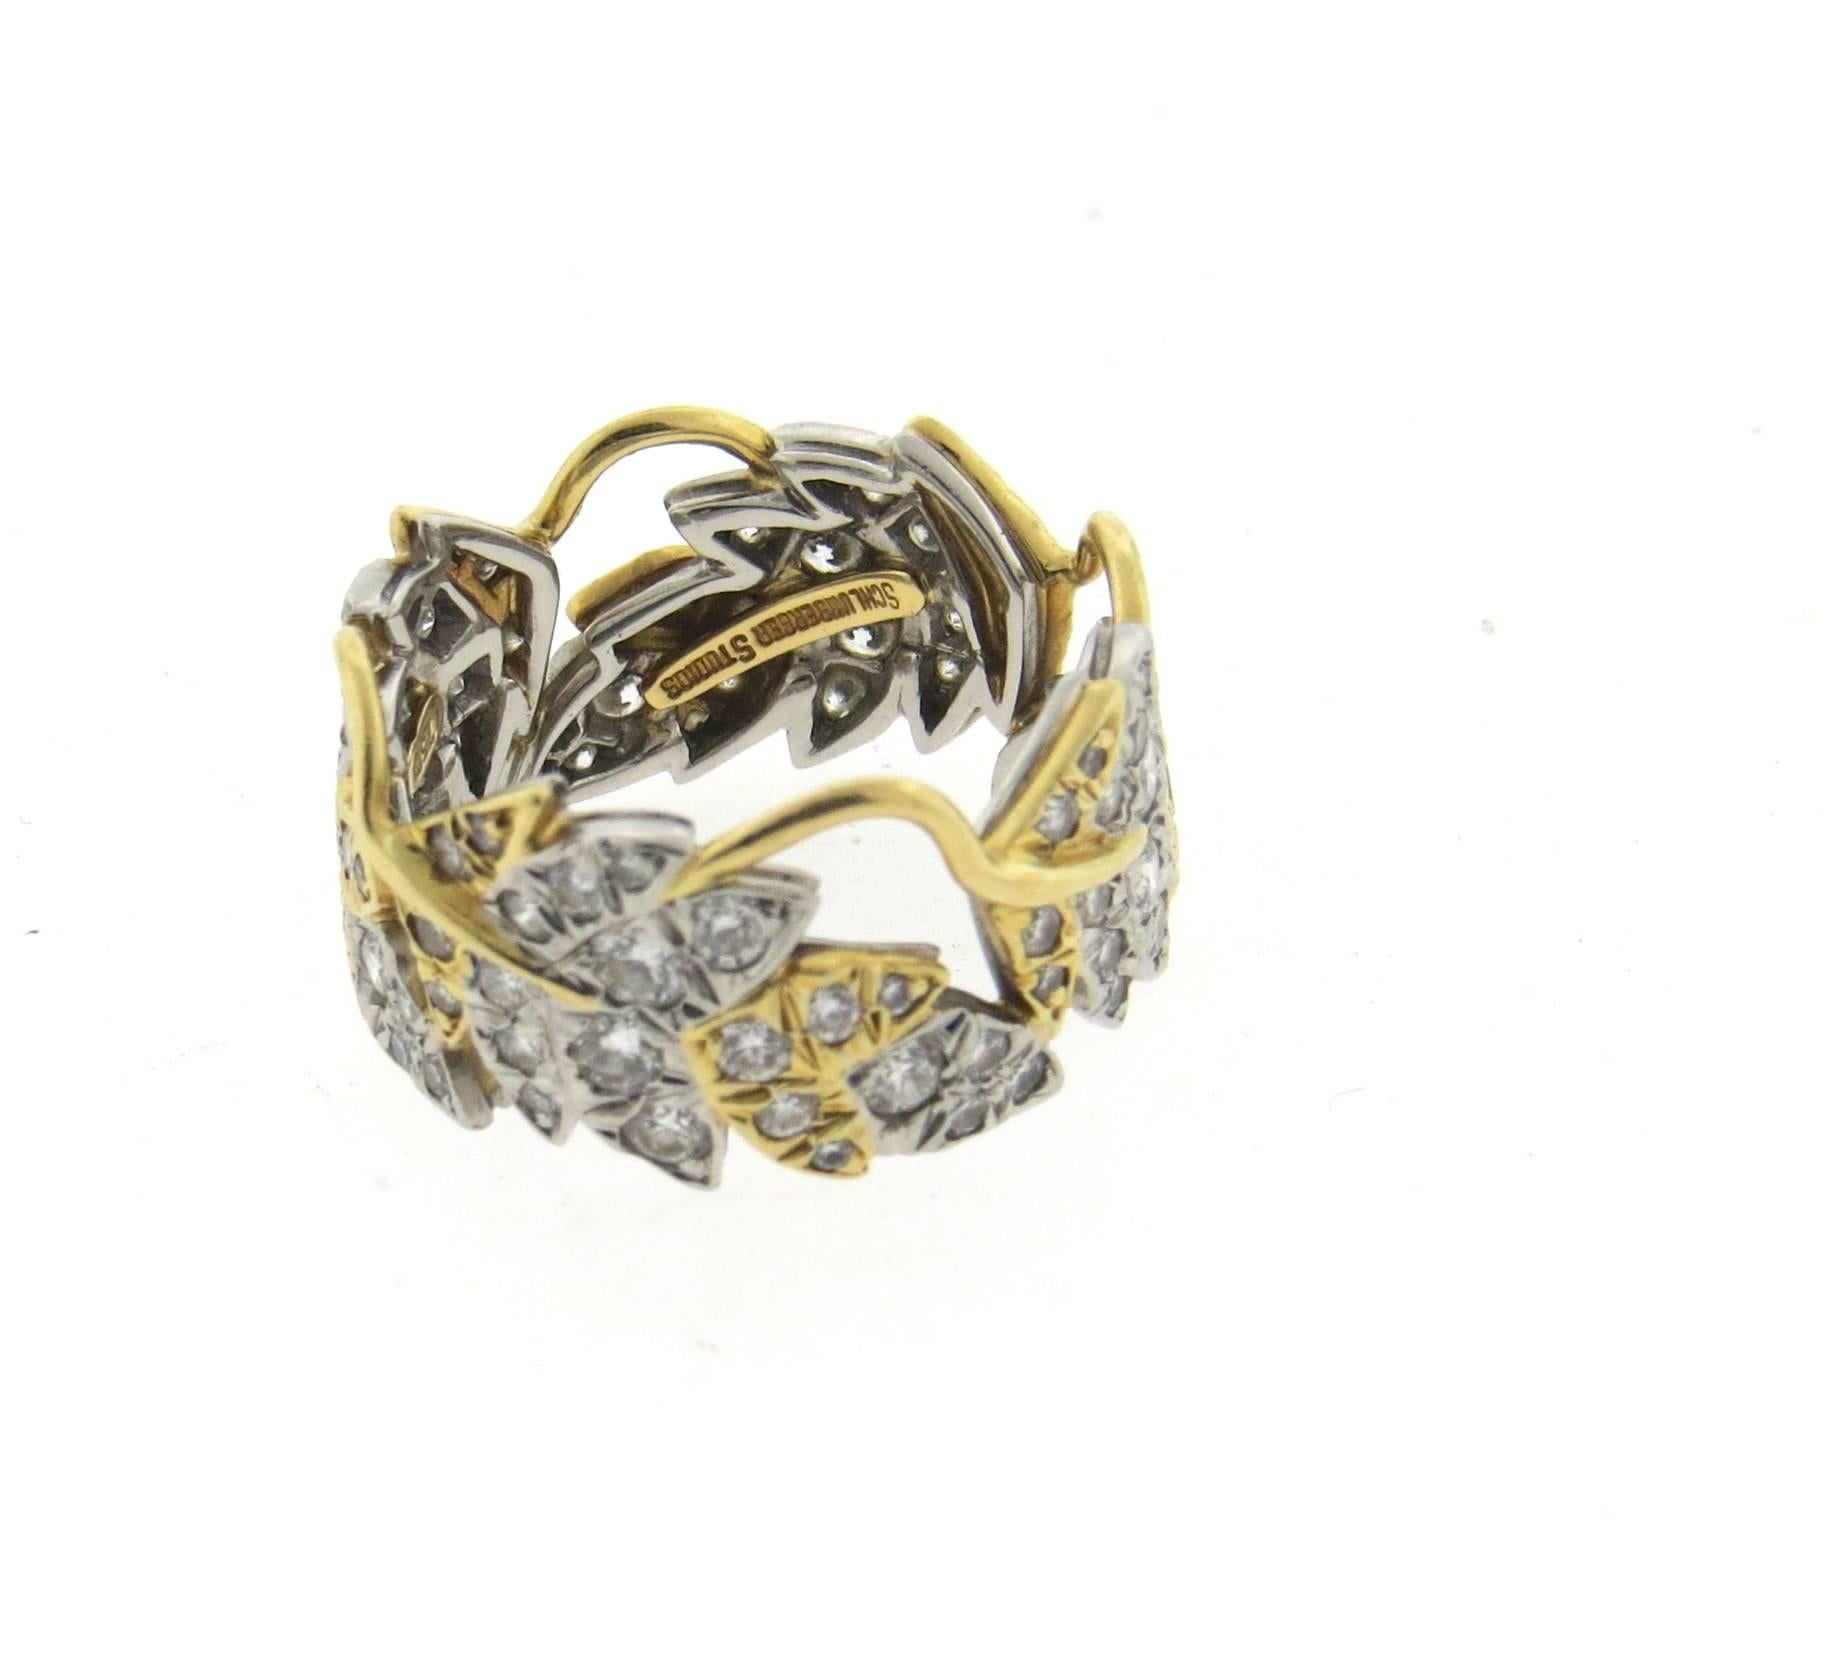 An 18k gold and platinum band ring, crafted by Jean Schlumberger for Tiffany & Co, from Four Leaves collection. Ring is decorated with 1.60ctw in G/VS diamonds. Ring is a size 6 and is 10.5mm wide. Marked: 750, pt950, Tiffany & Co, Schlumberger